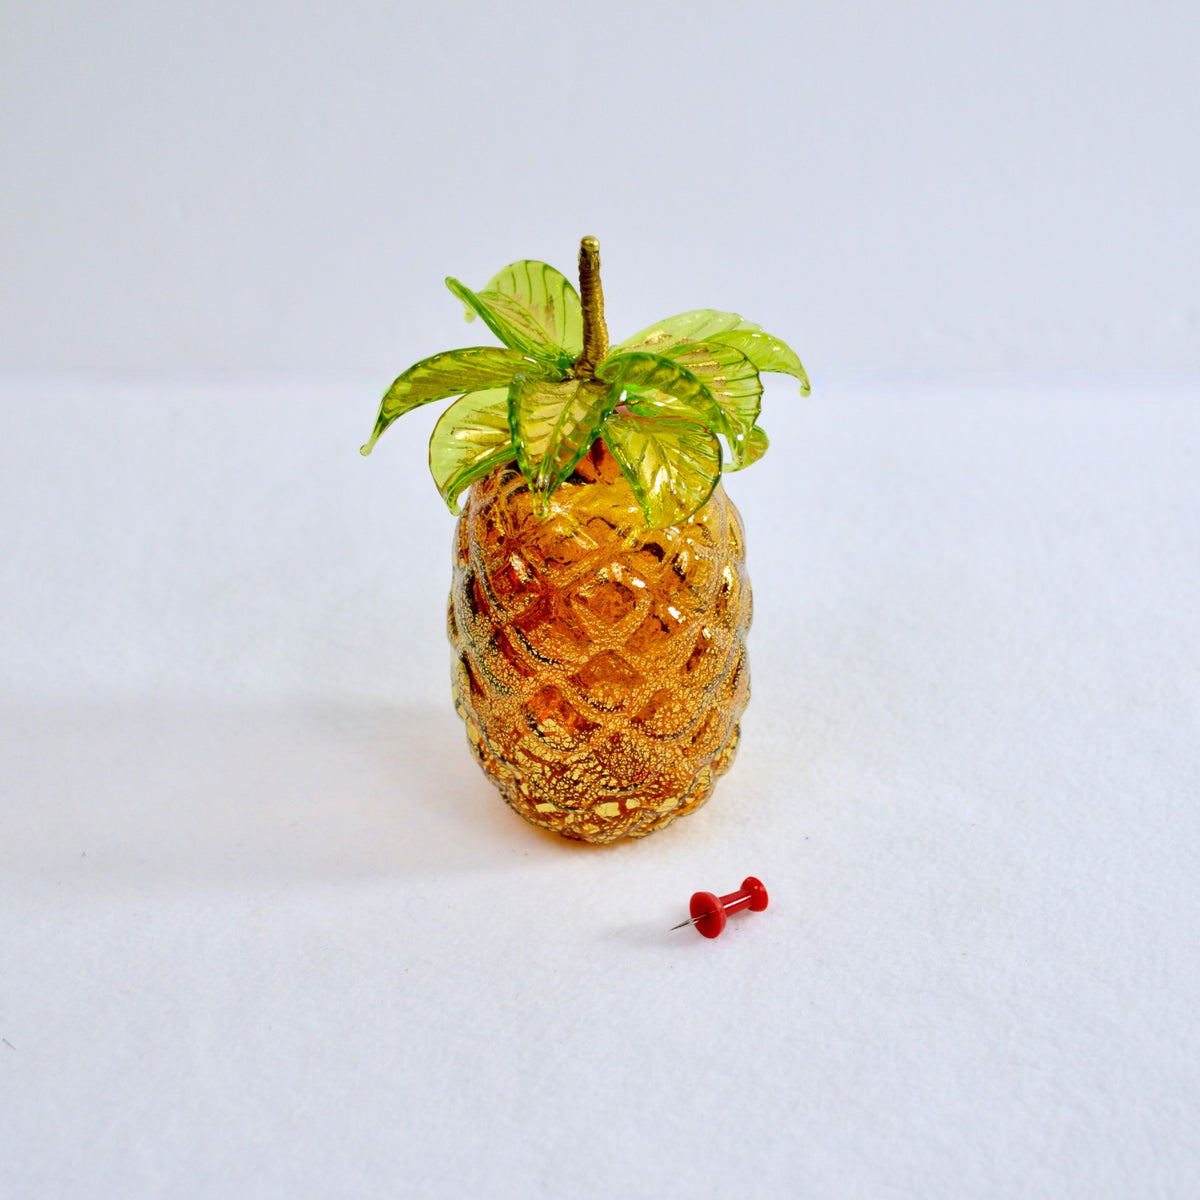 An amber colored Murano glass pineapple is shown with a push pin for scale.